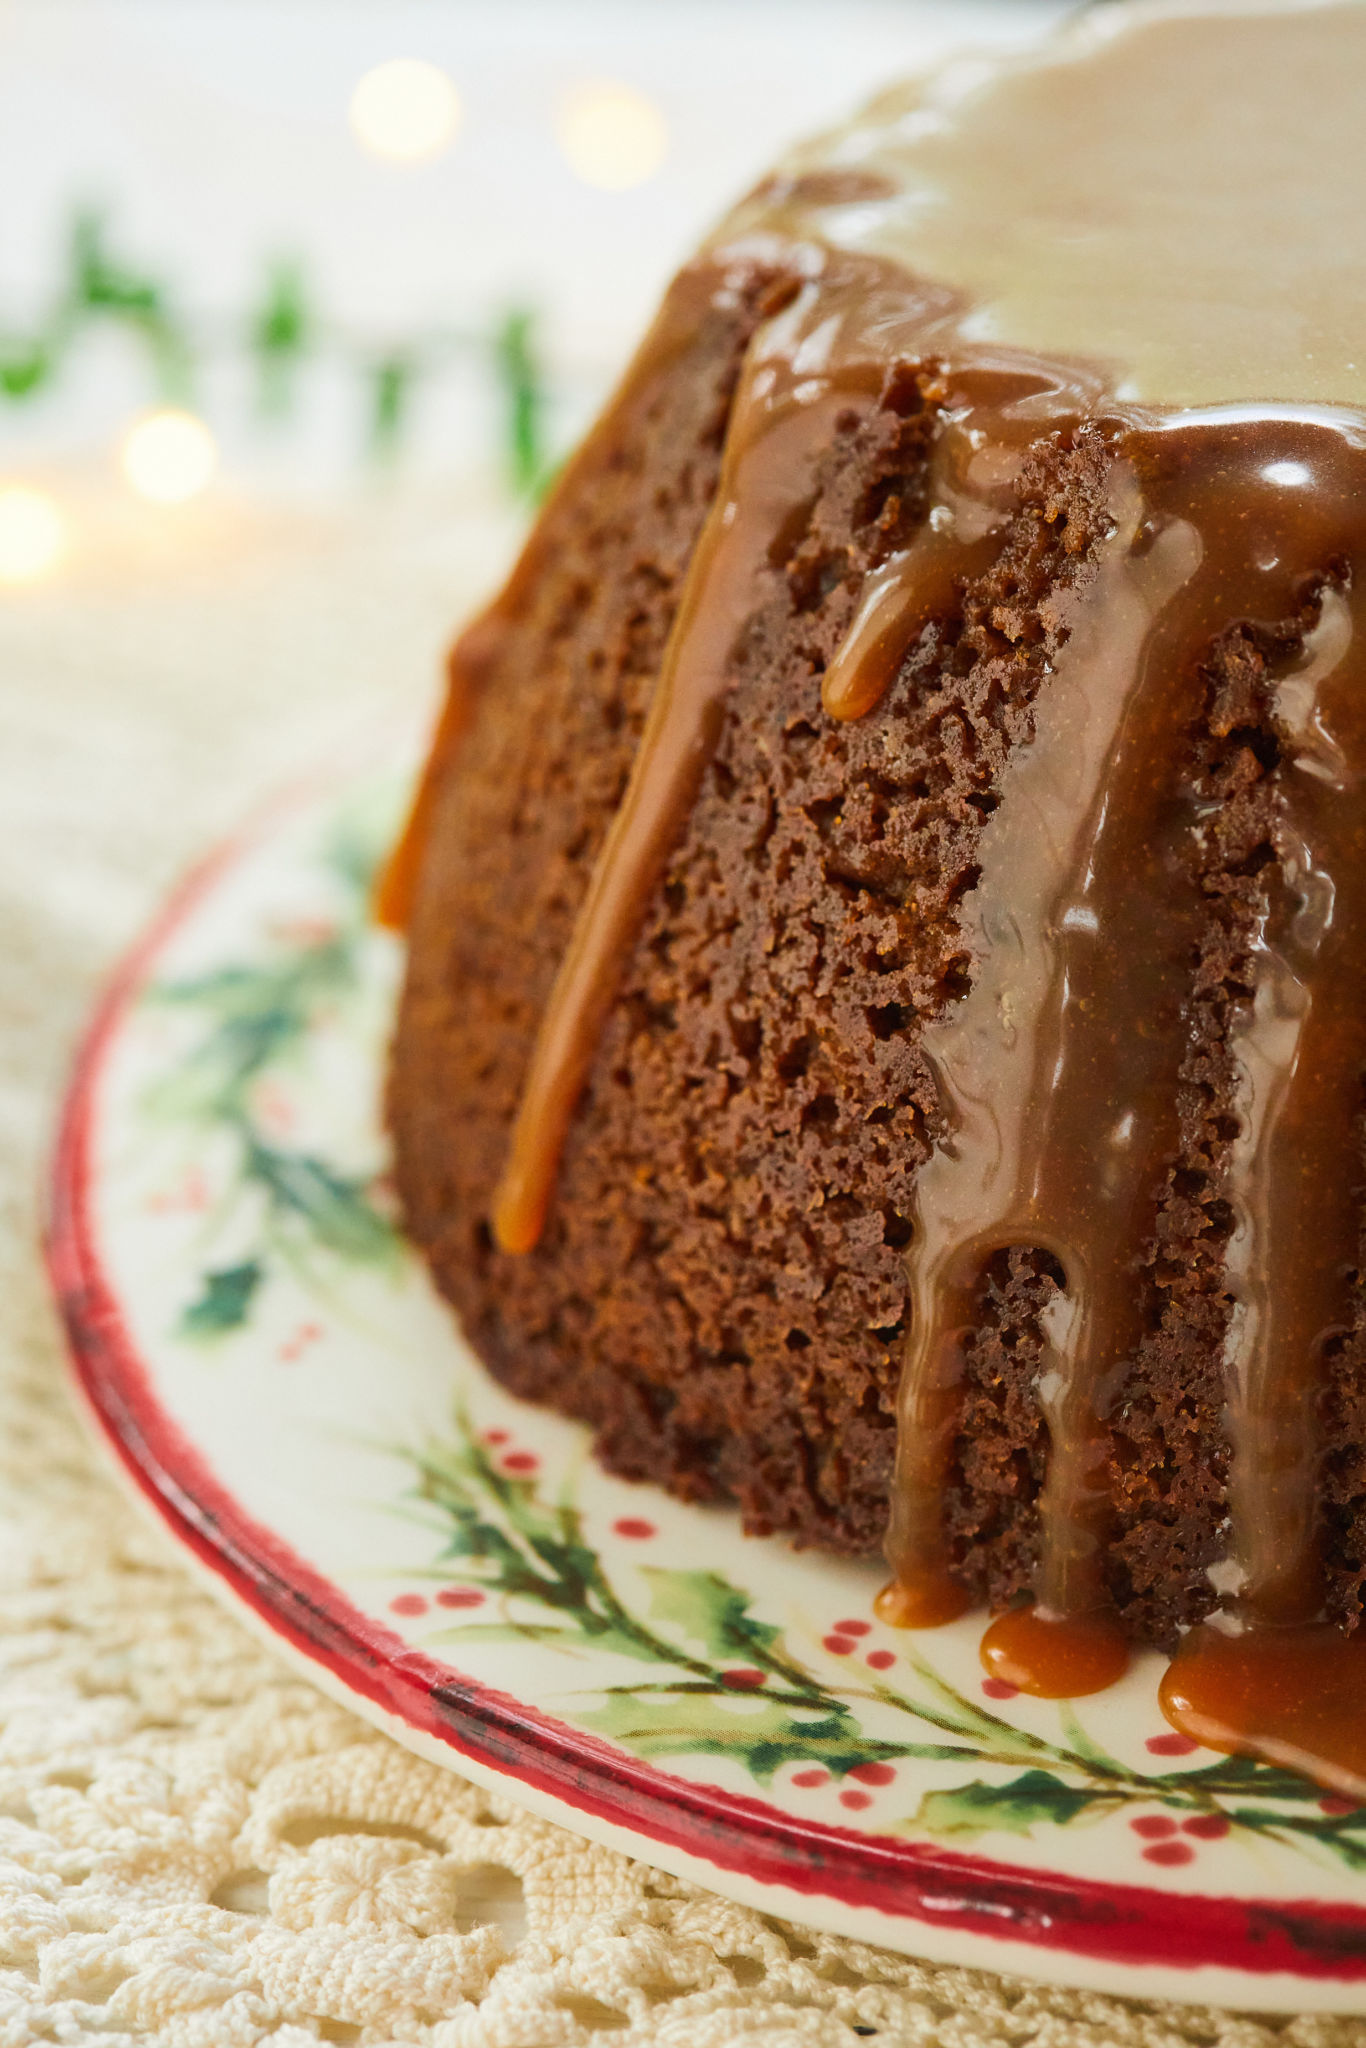 A close up of my Gingerbread Pudding with Caramel Sauce running down the sides.